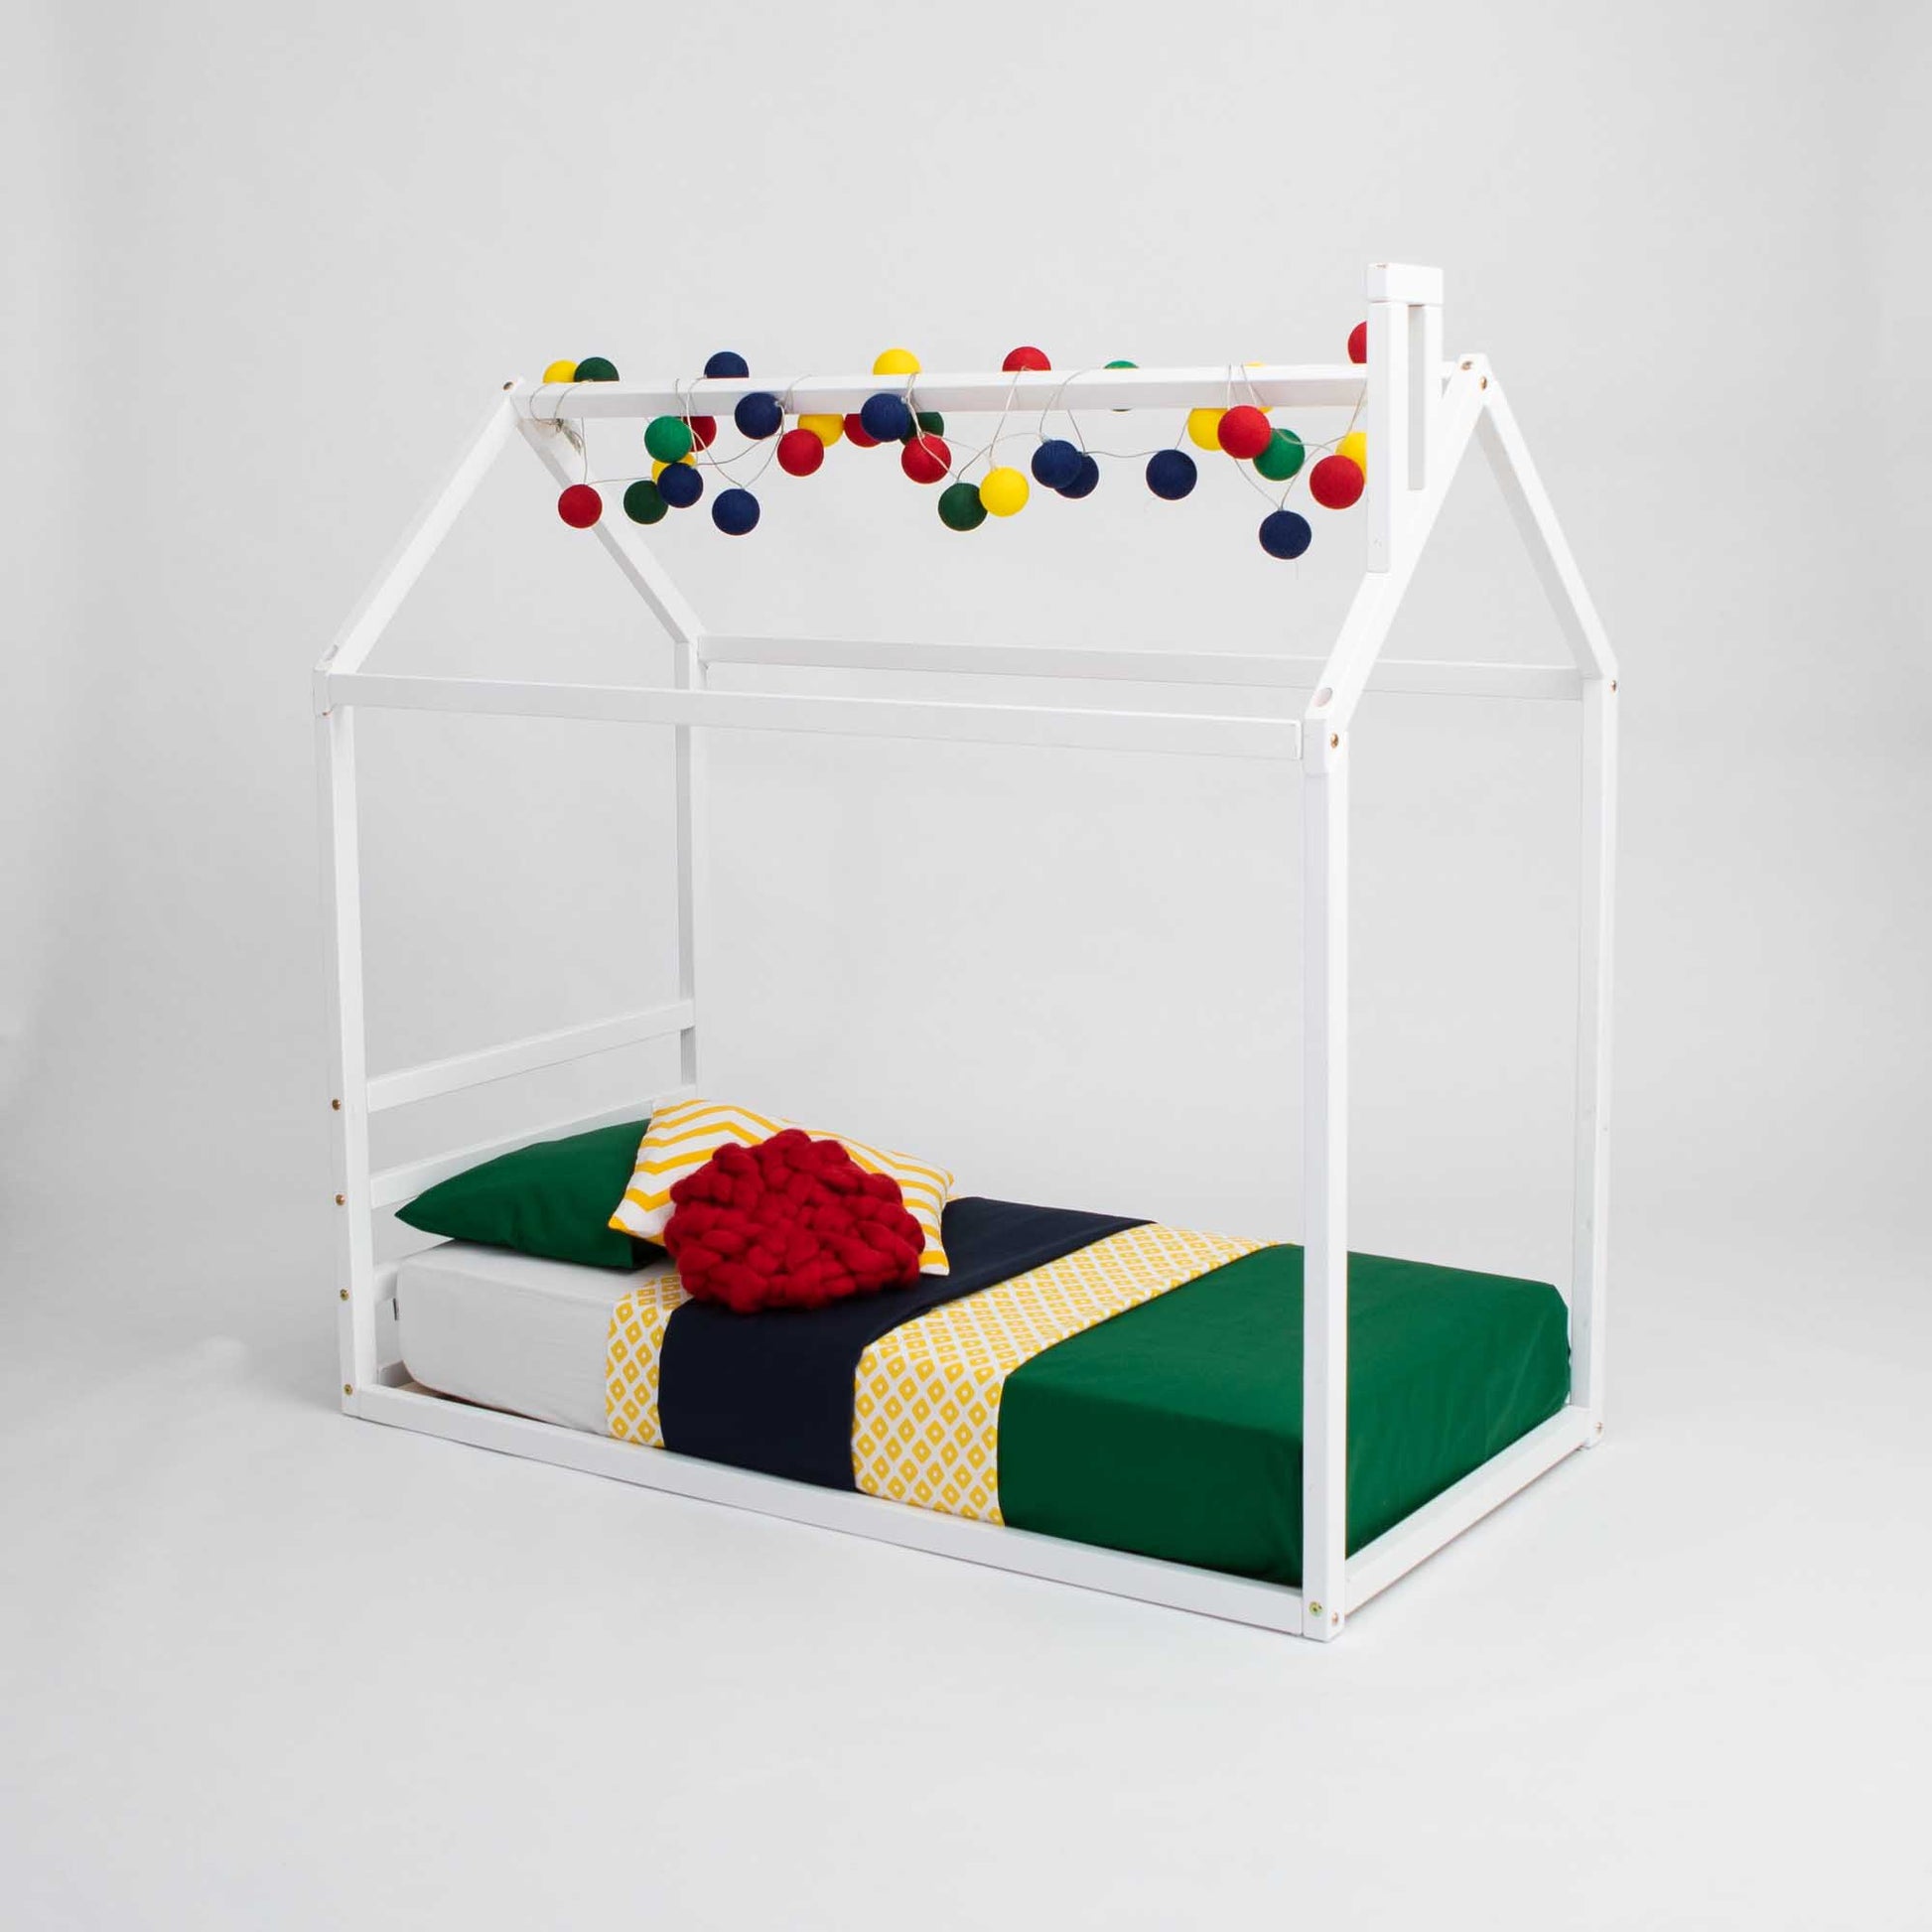 A Sweet Home From Wood children's house bed with a horizontal headboard and colorful pom poms.